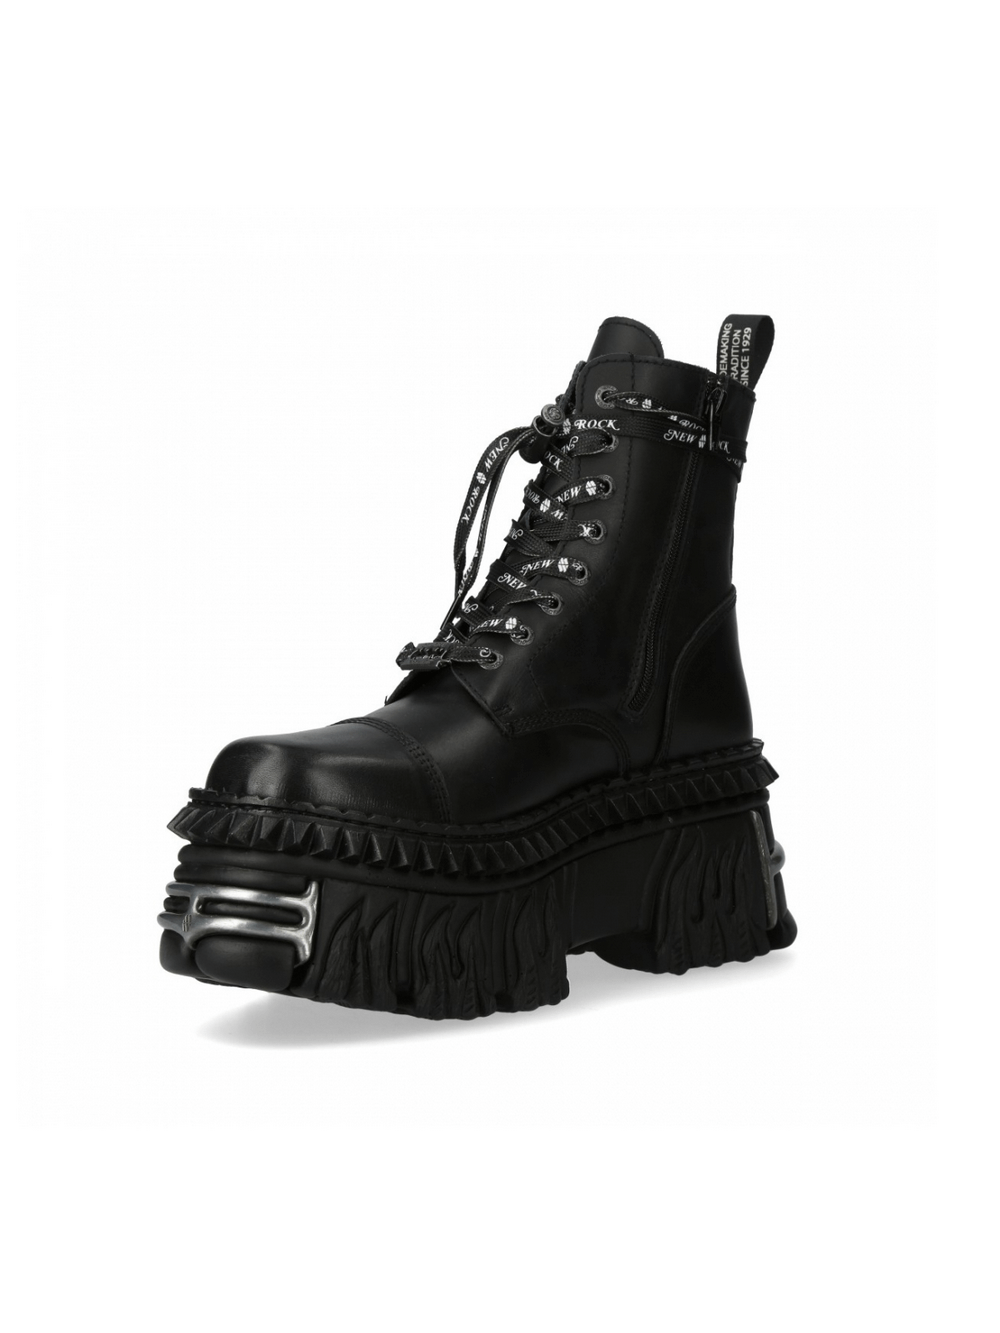 NEW ROCK Women's Black Ankle Boots with Lace Detail